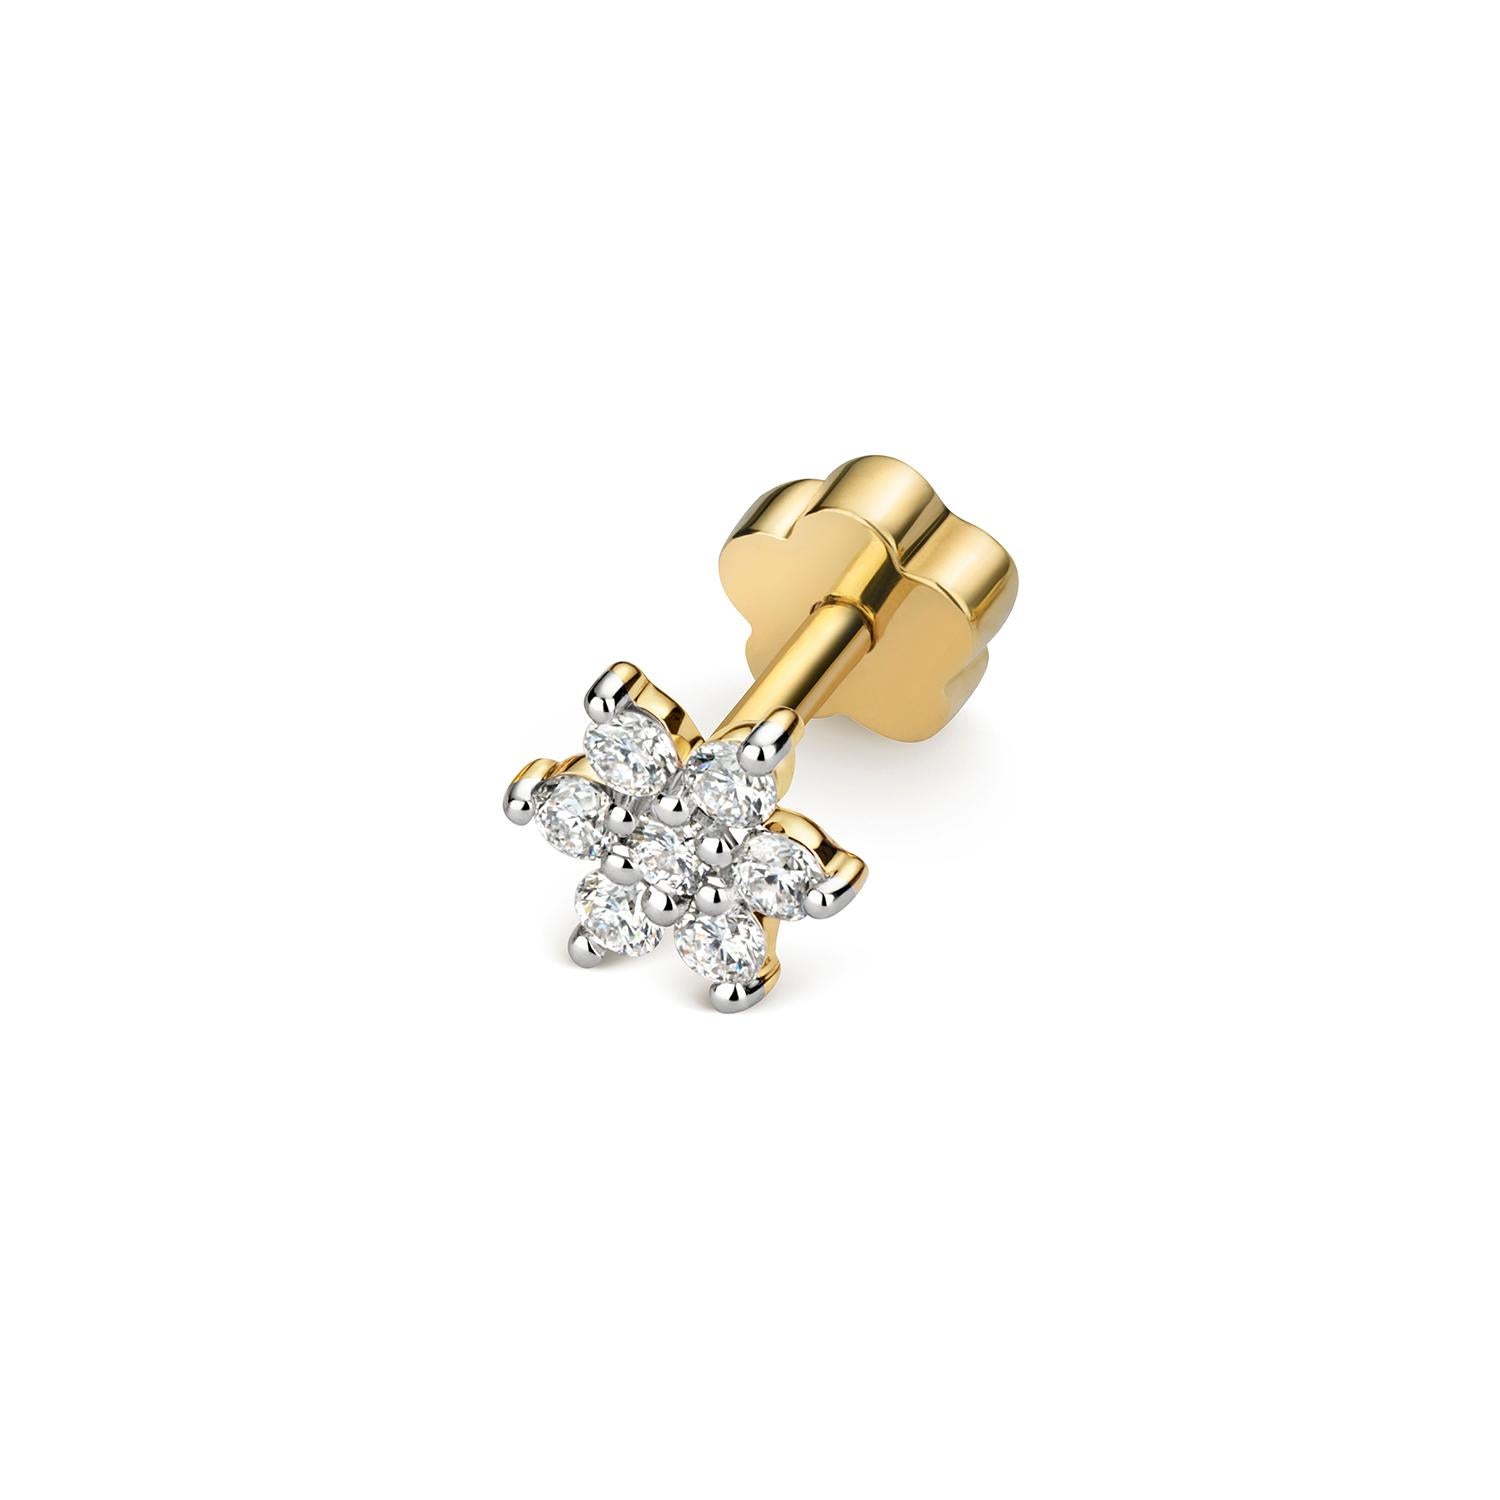 DIAMOND CARTILAGE FLOWER STUD

9CT Y/G GH SI3-I1 0.10CT

Weight: 0.5g

Number Of Stones:7

Total Carates:0.100